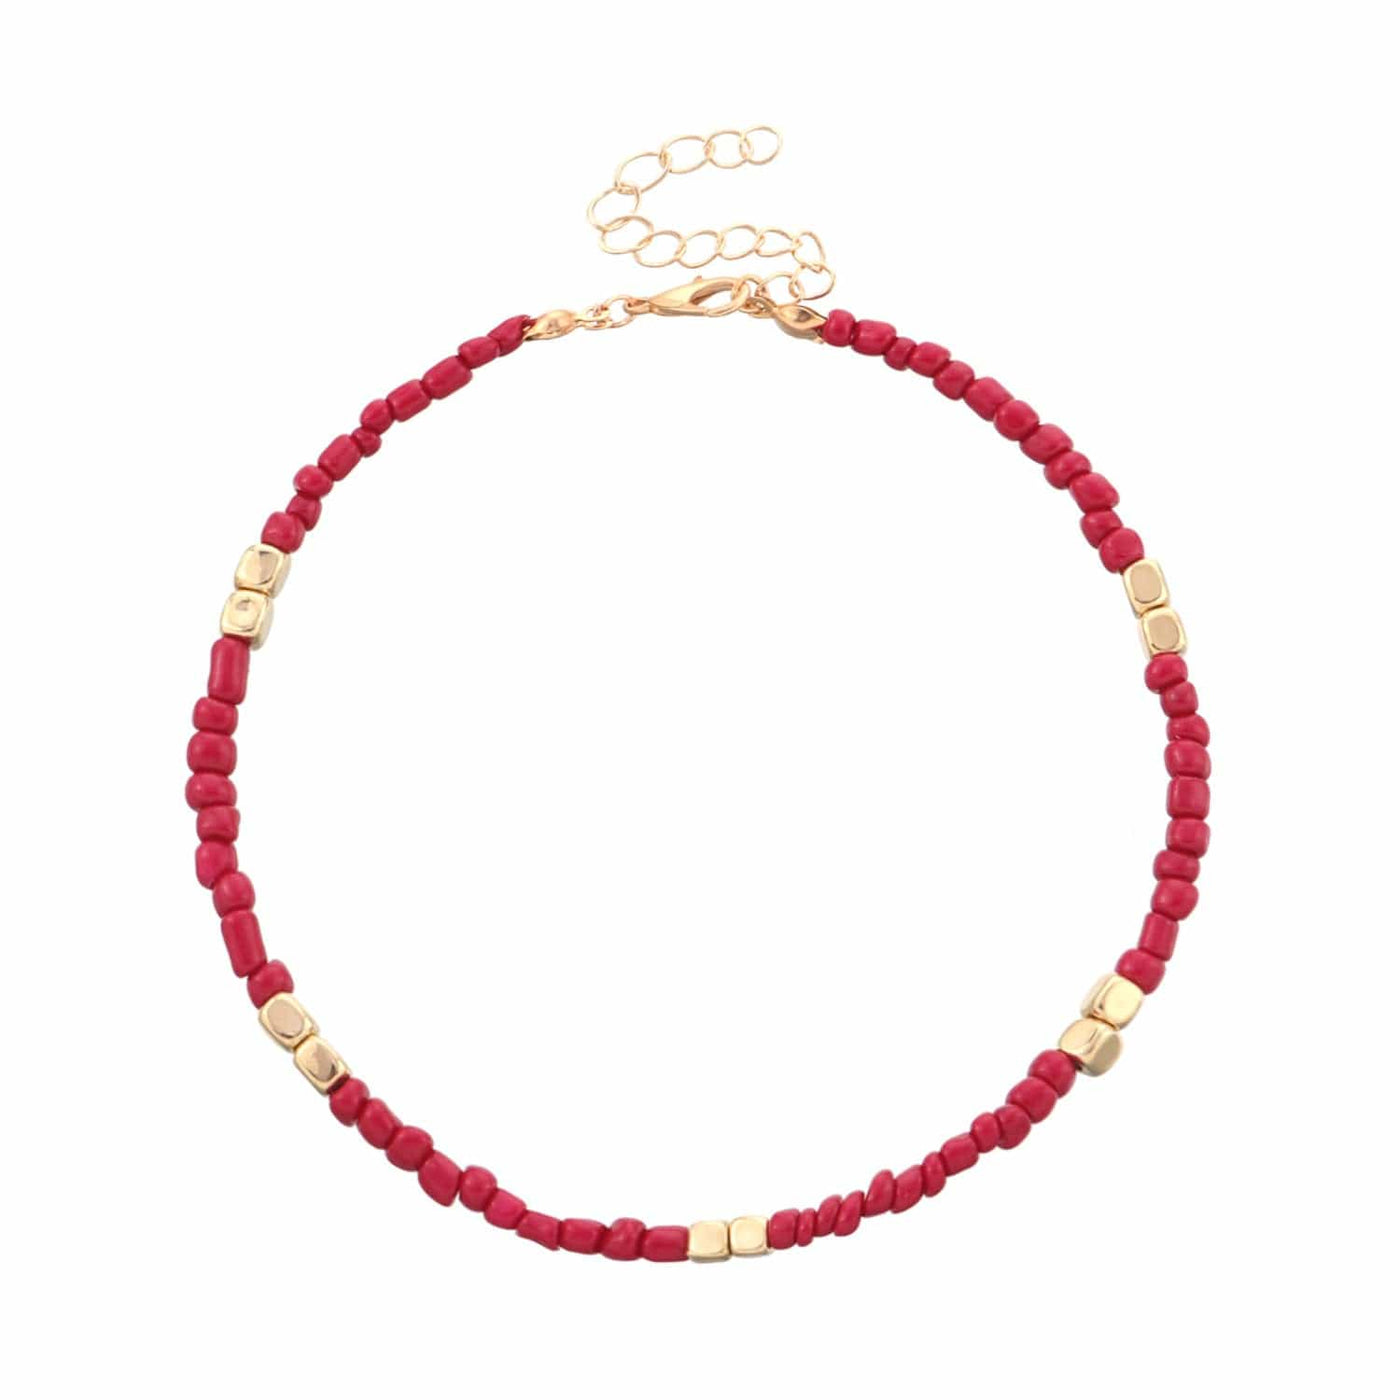 BROOCHITON Anklets Rose Red New Golden Rice Bead Beach Anklet Women